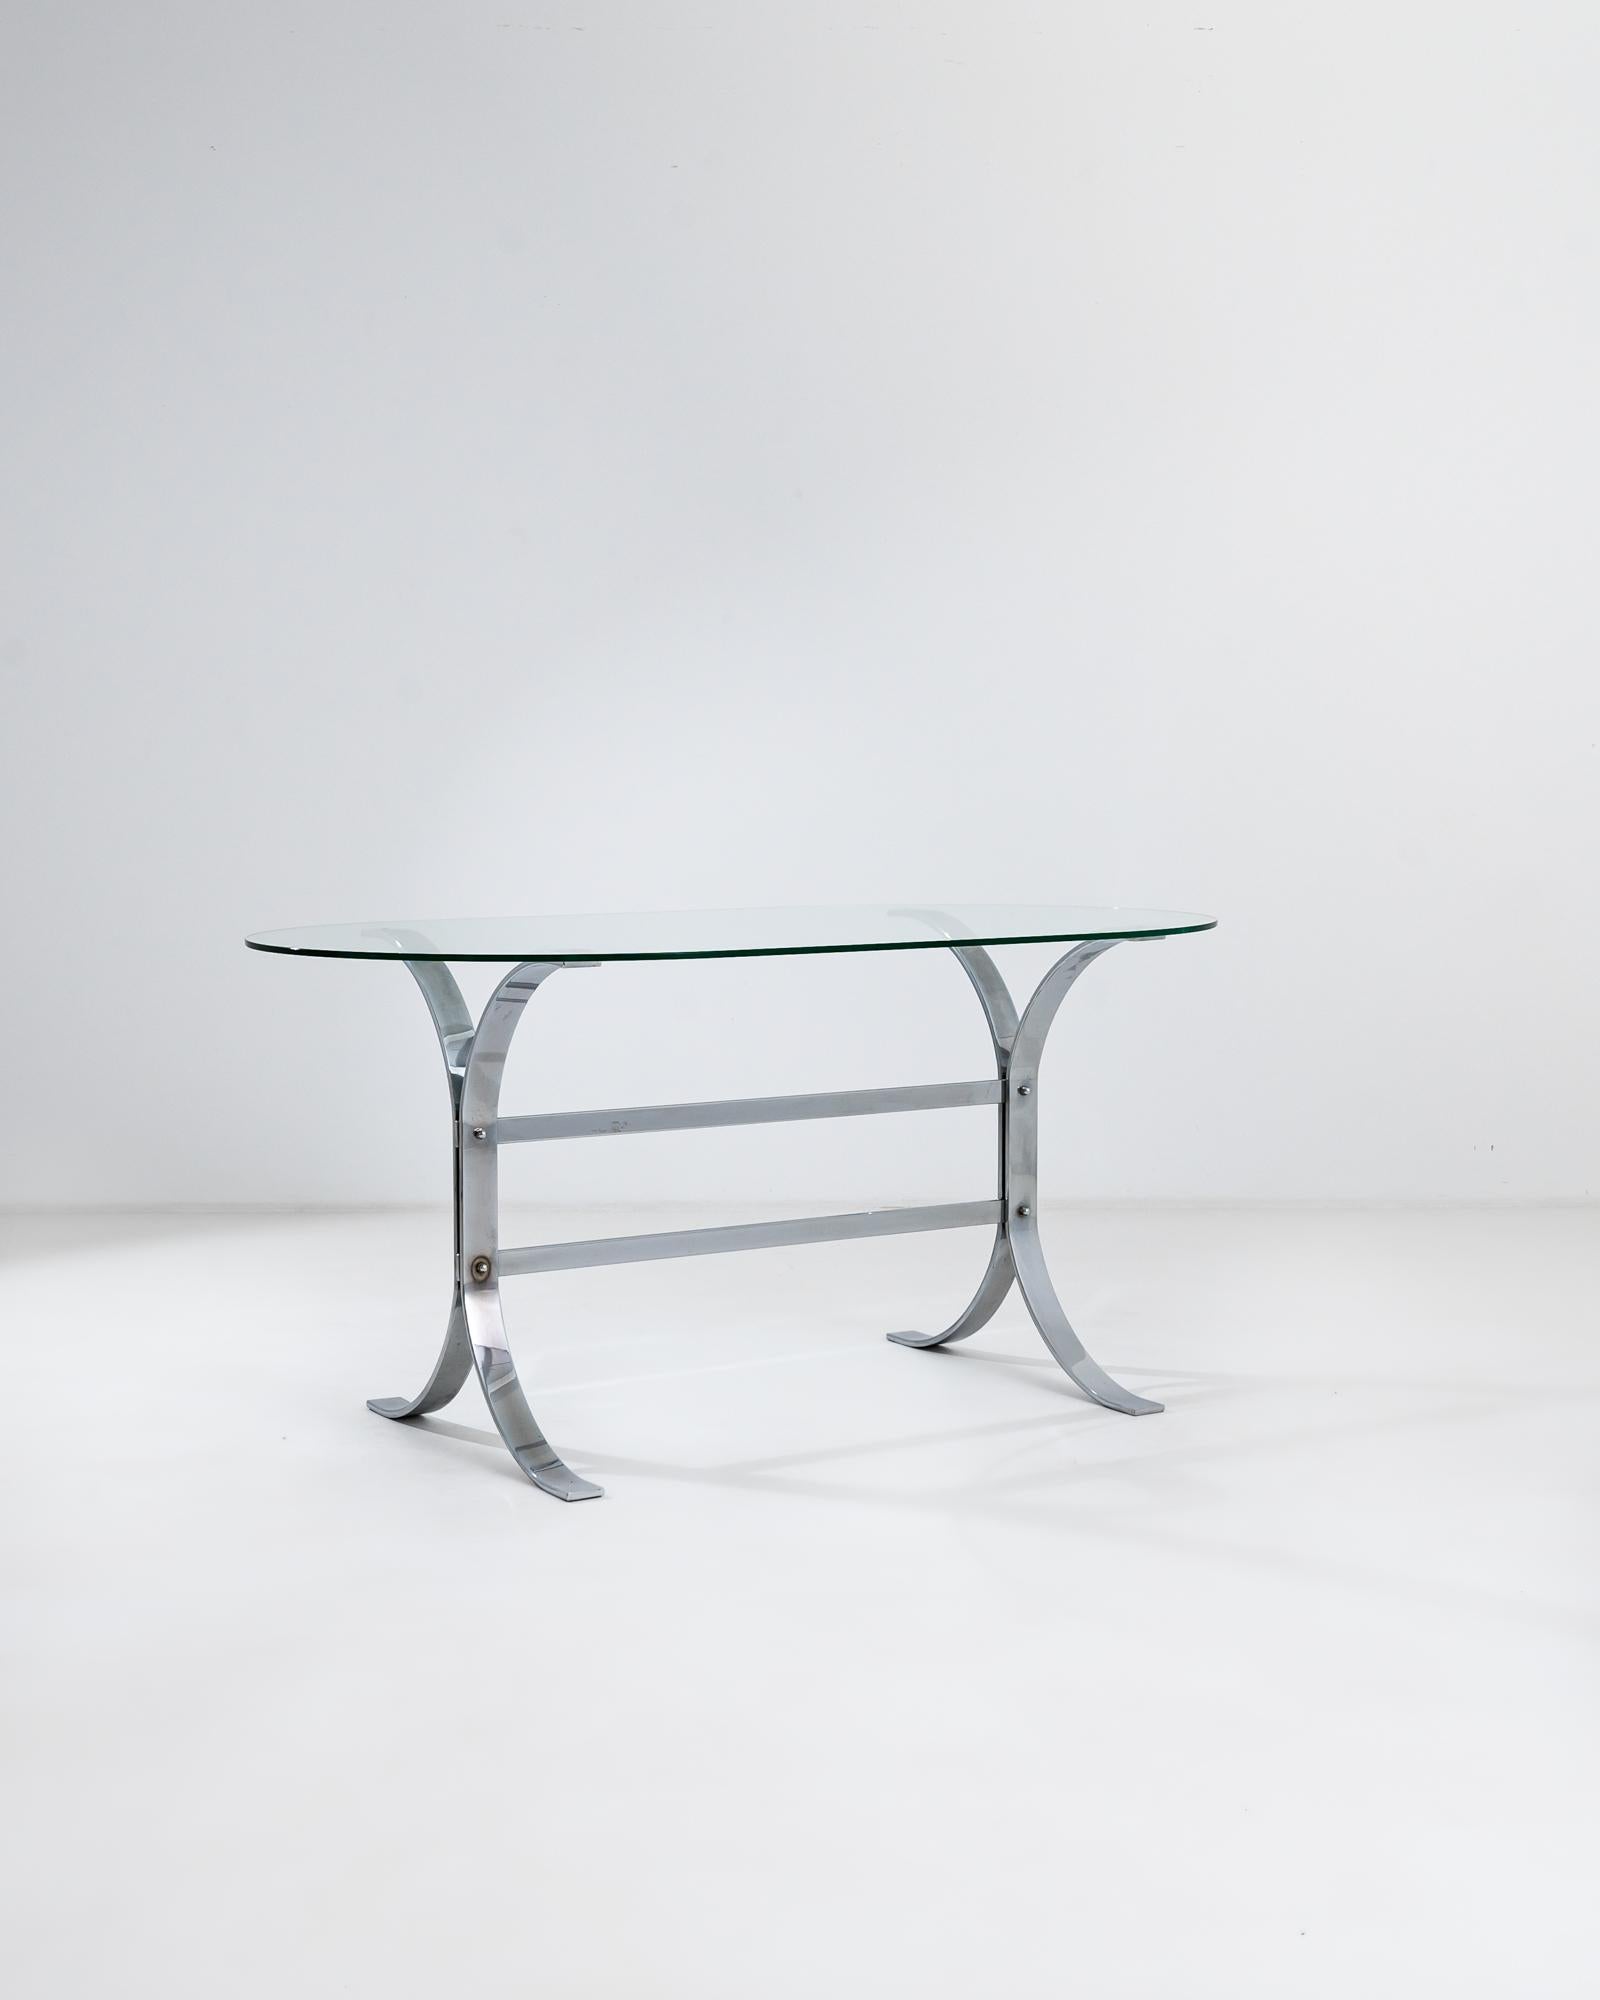 Late 20th Century Mid-Century Modern Italian Glass Dining Table For Sale